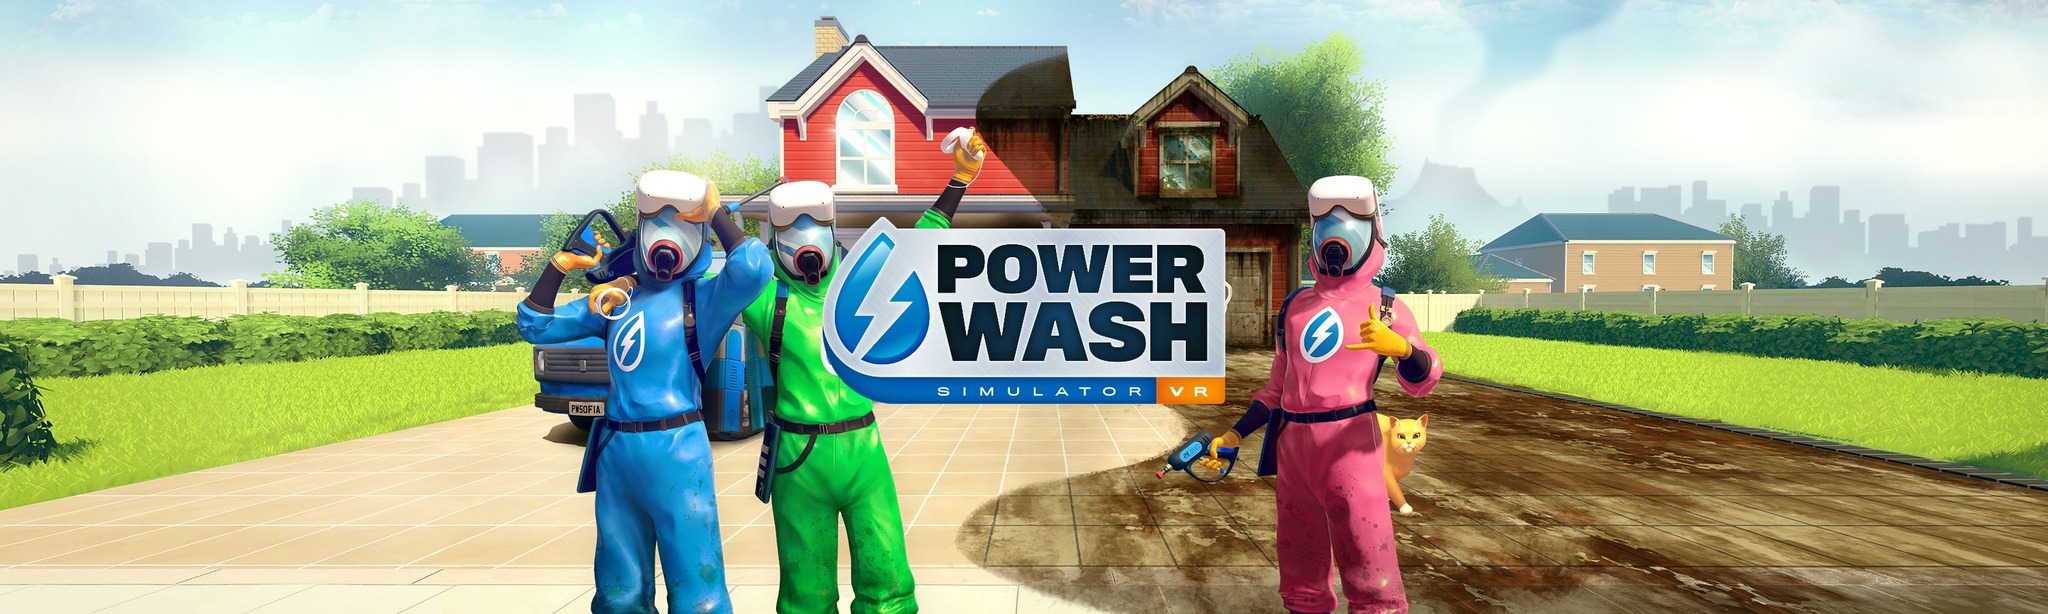 PowerWash Simulator research uncovers truths about gamer well-being